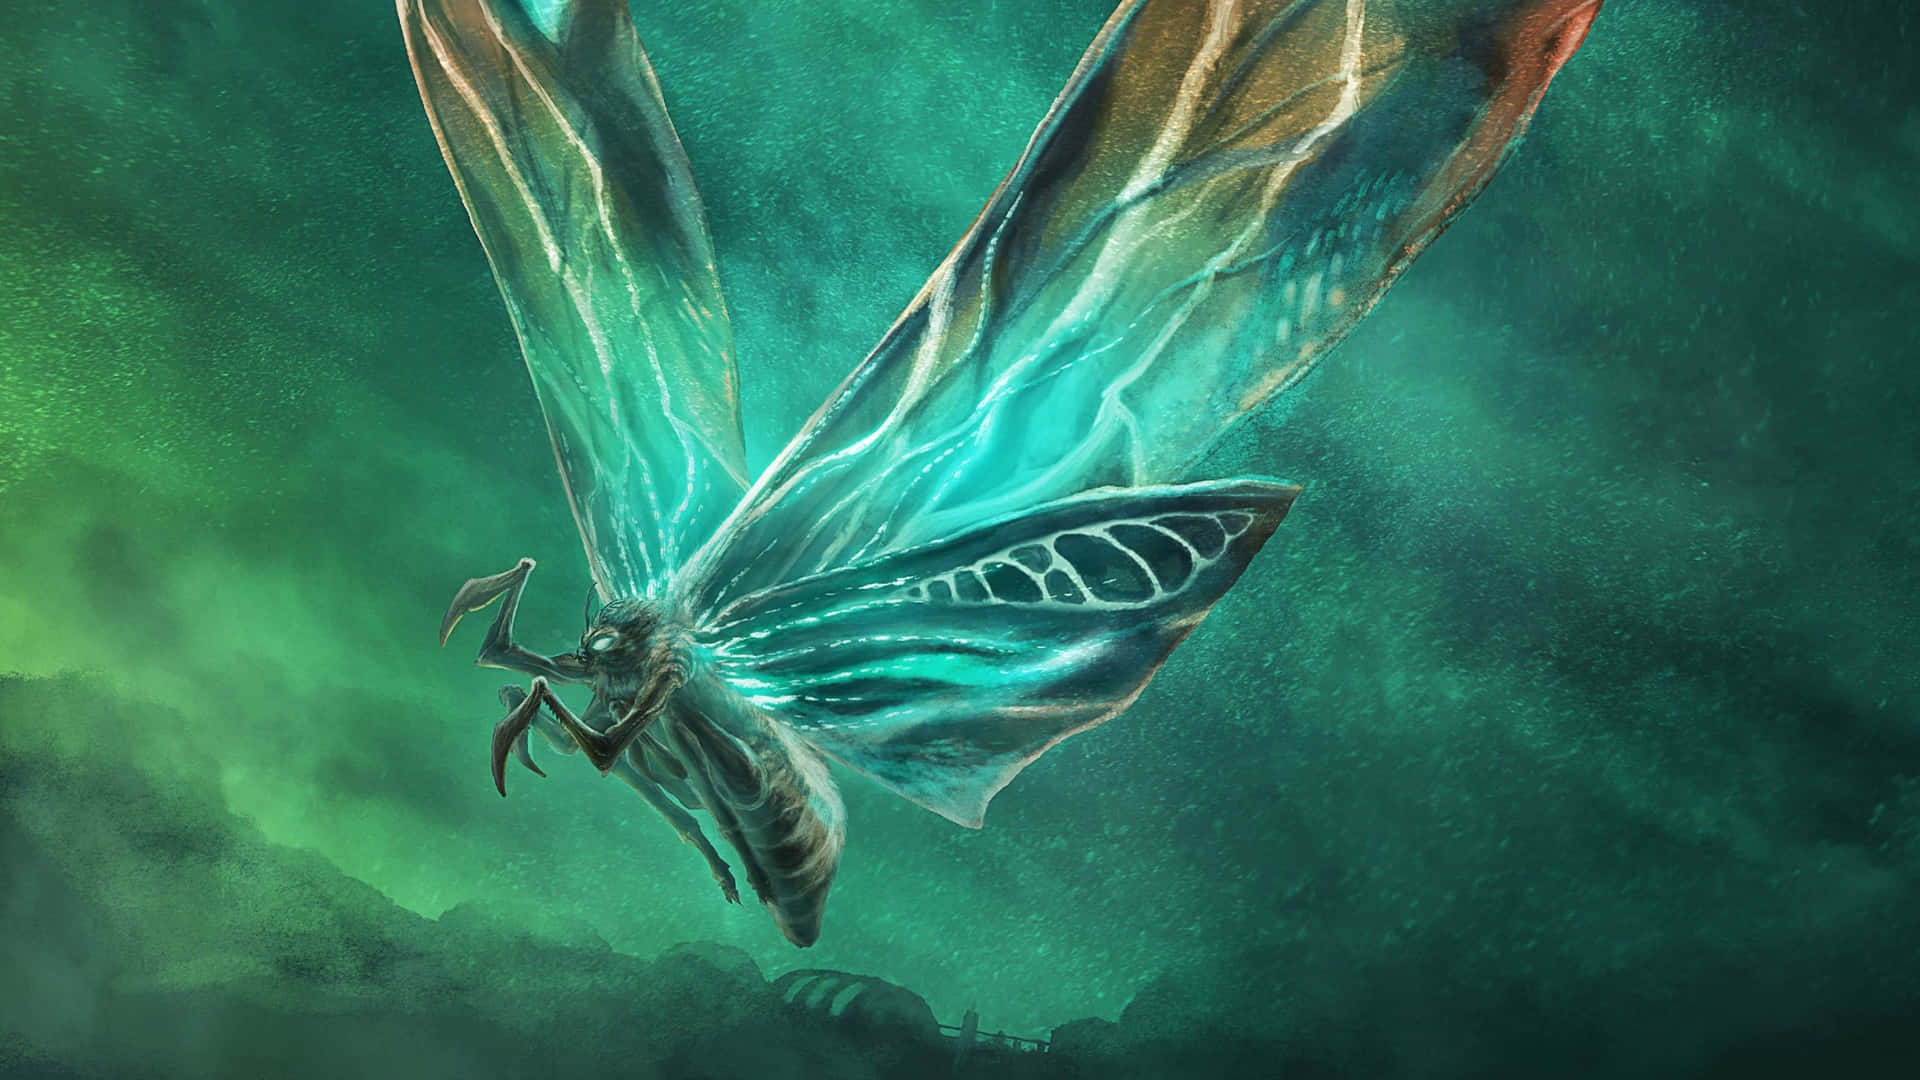 2560x1440mothra Monster Would Be Translated To 